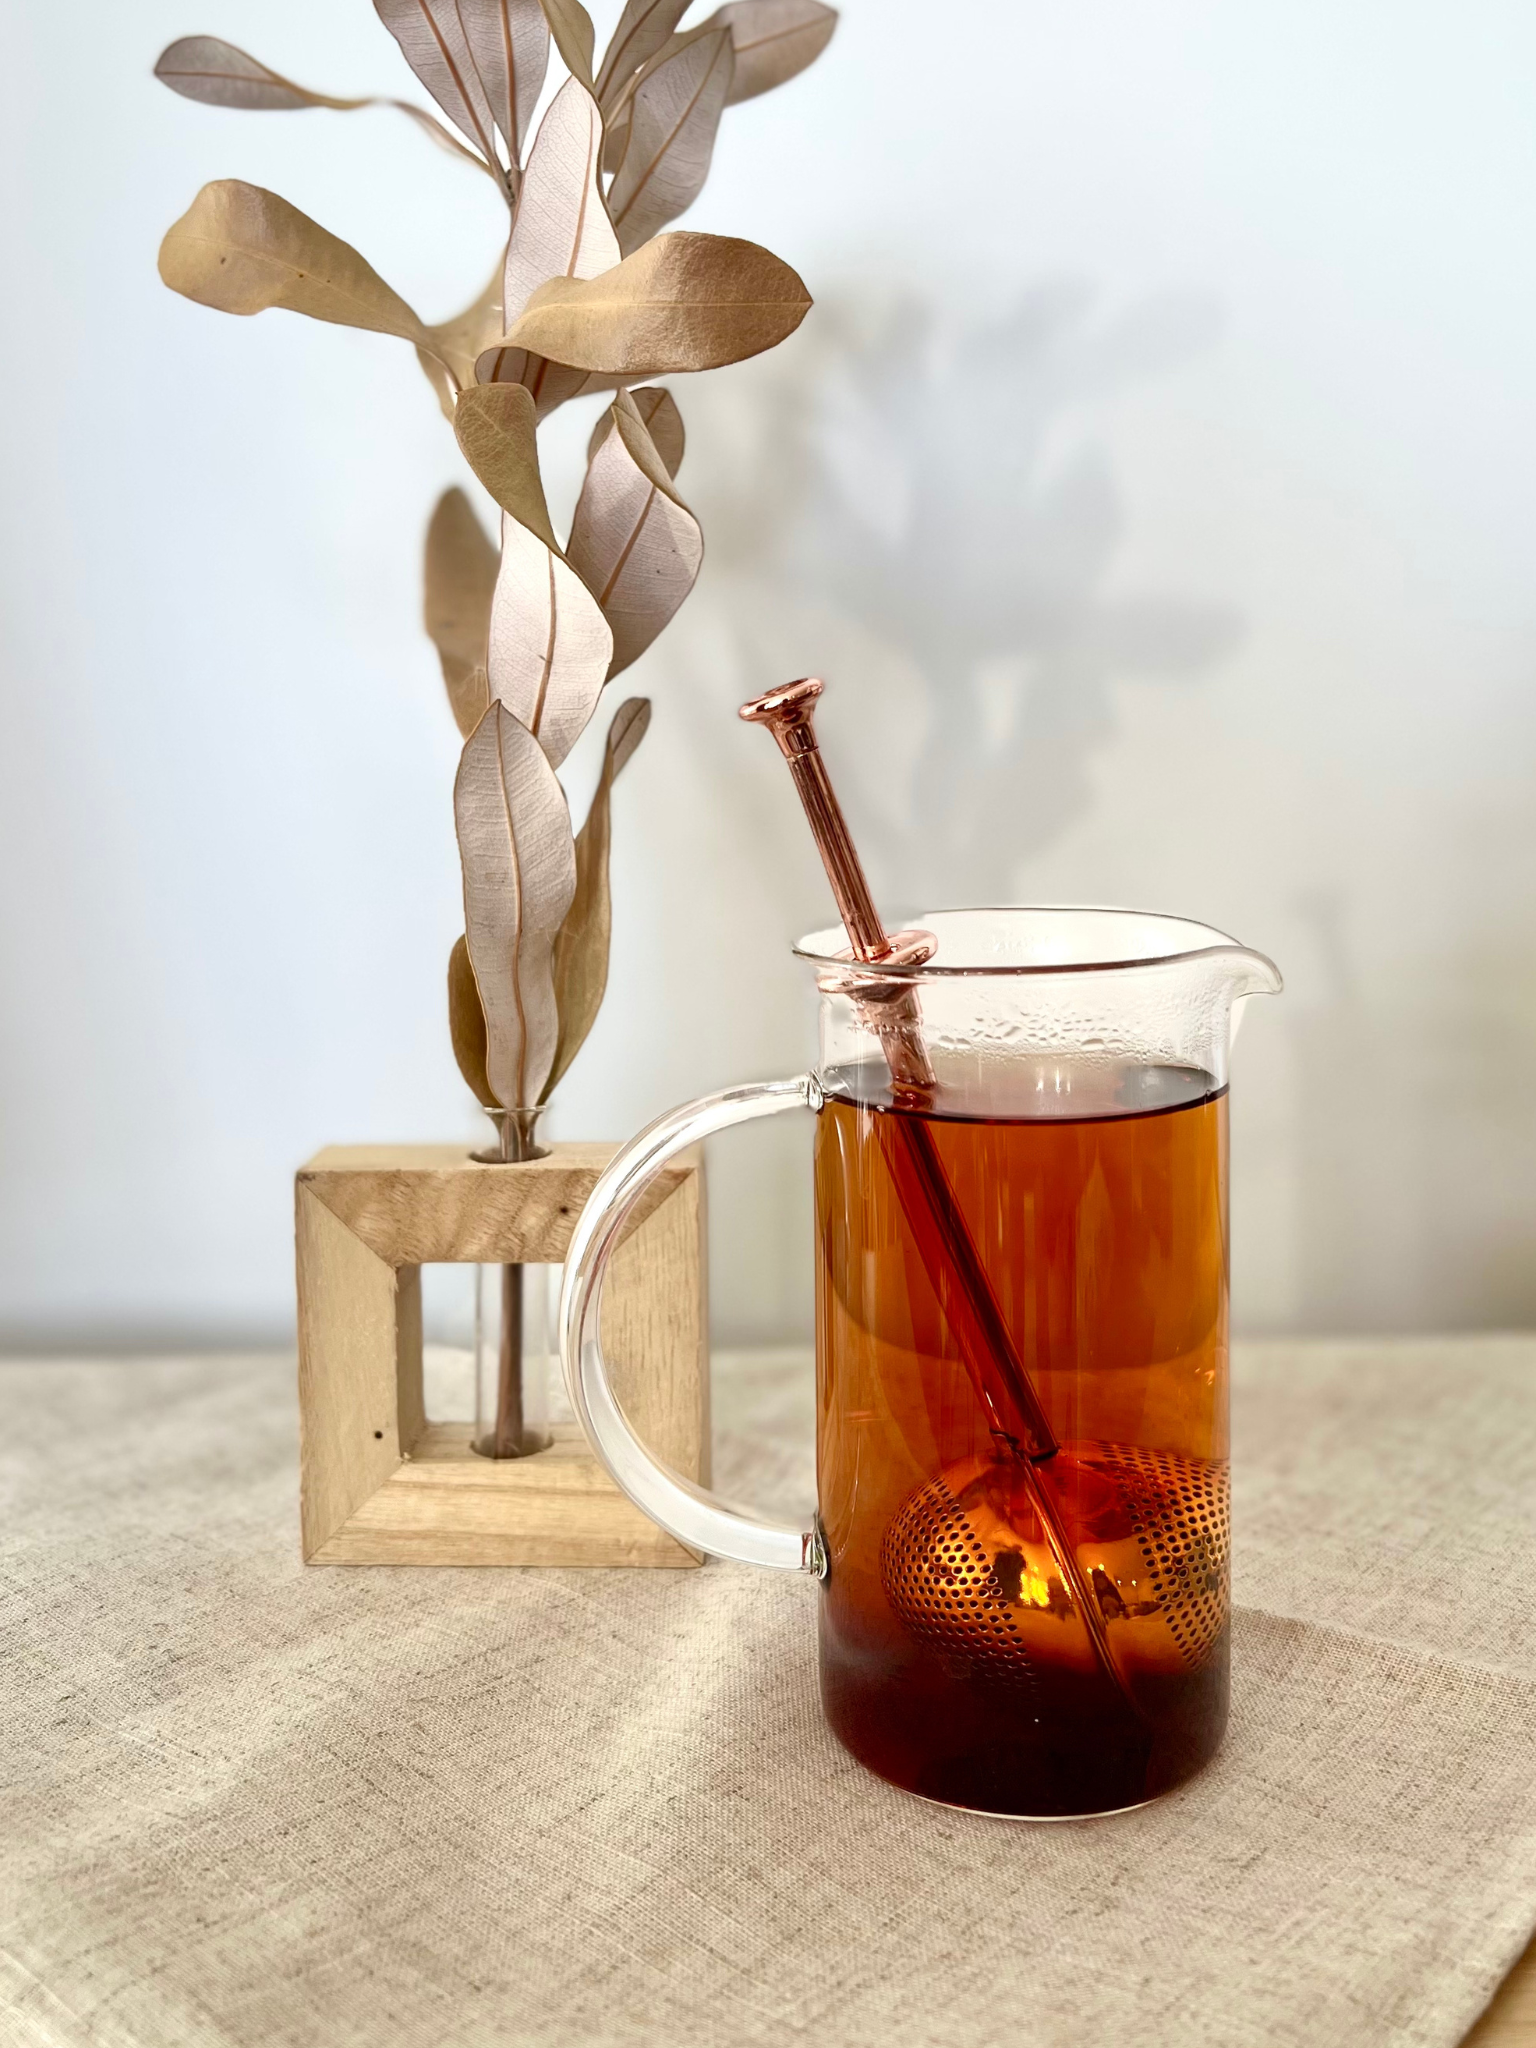 Good Karma tea infuser ball is 2-in-1 scoop and a strainer rose gold color inside transparent cup of tea and vase with flower